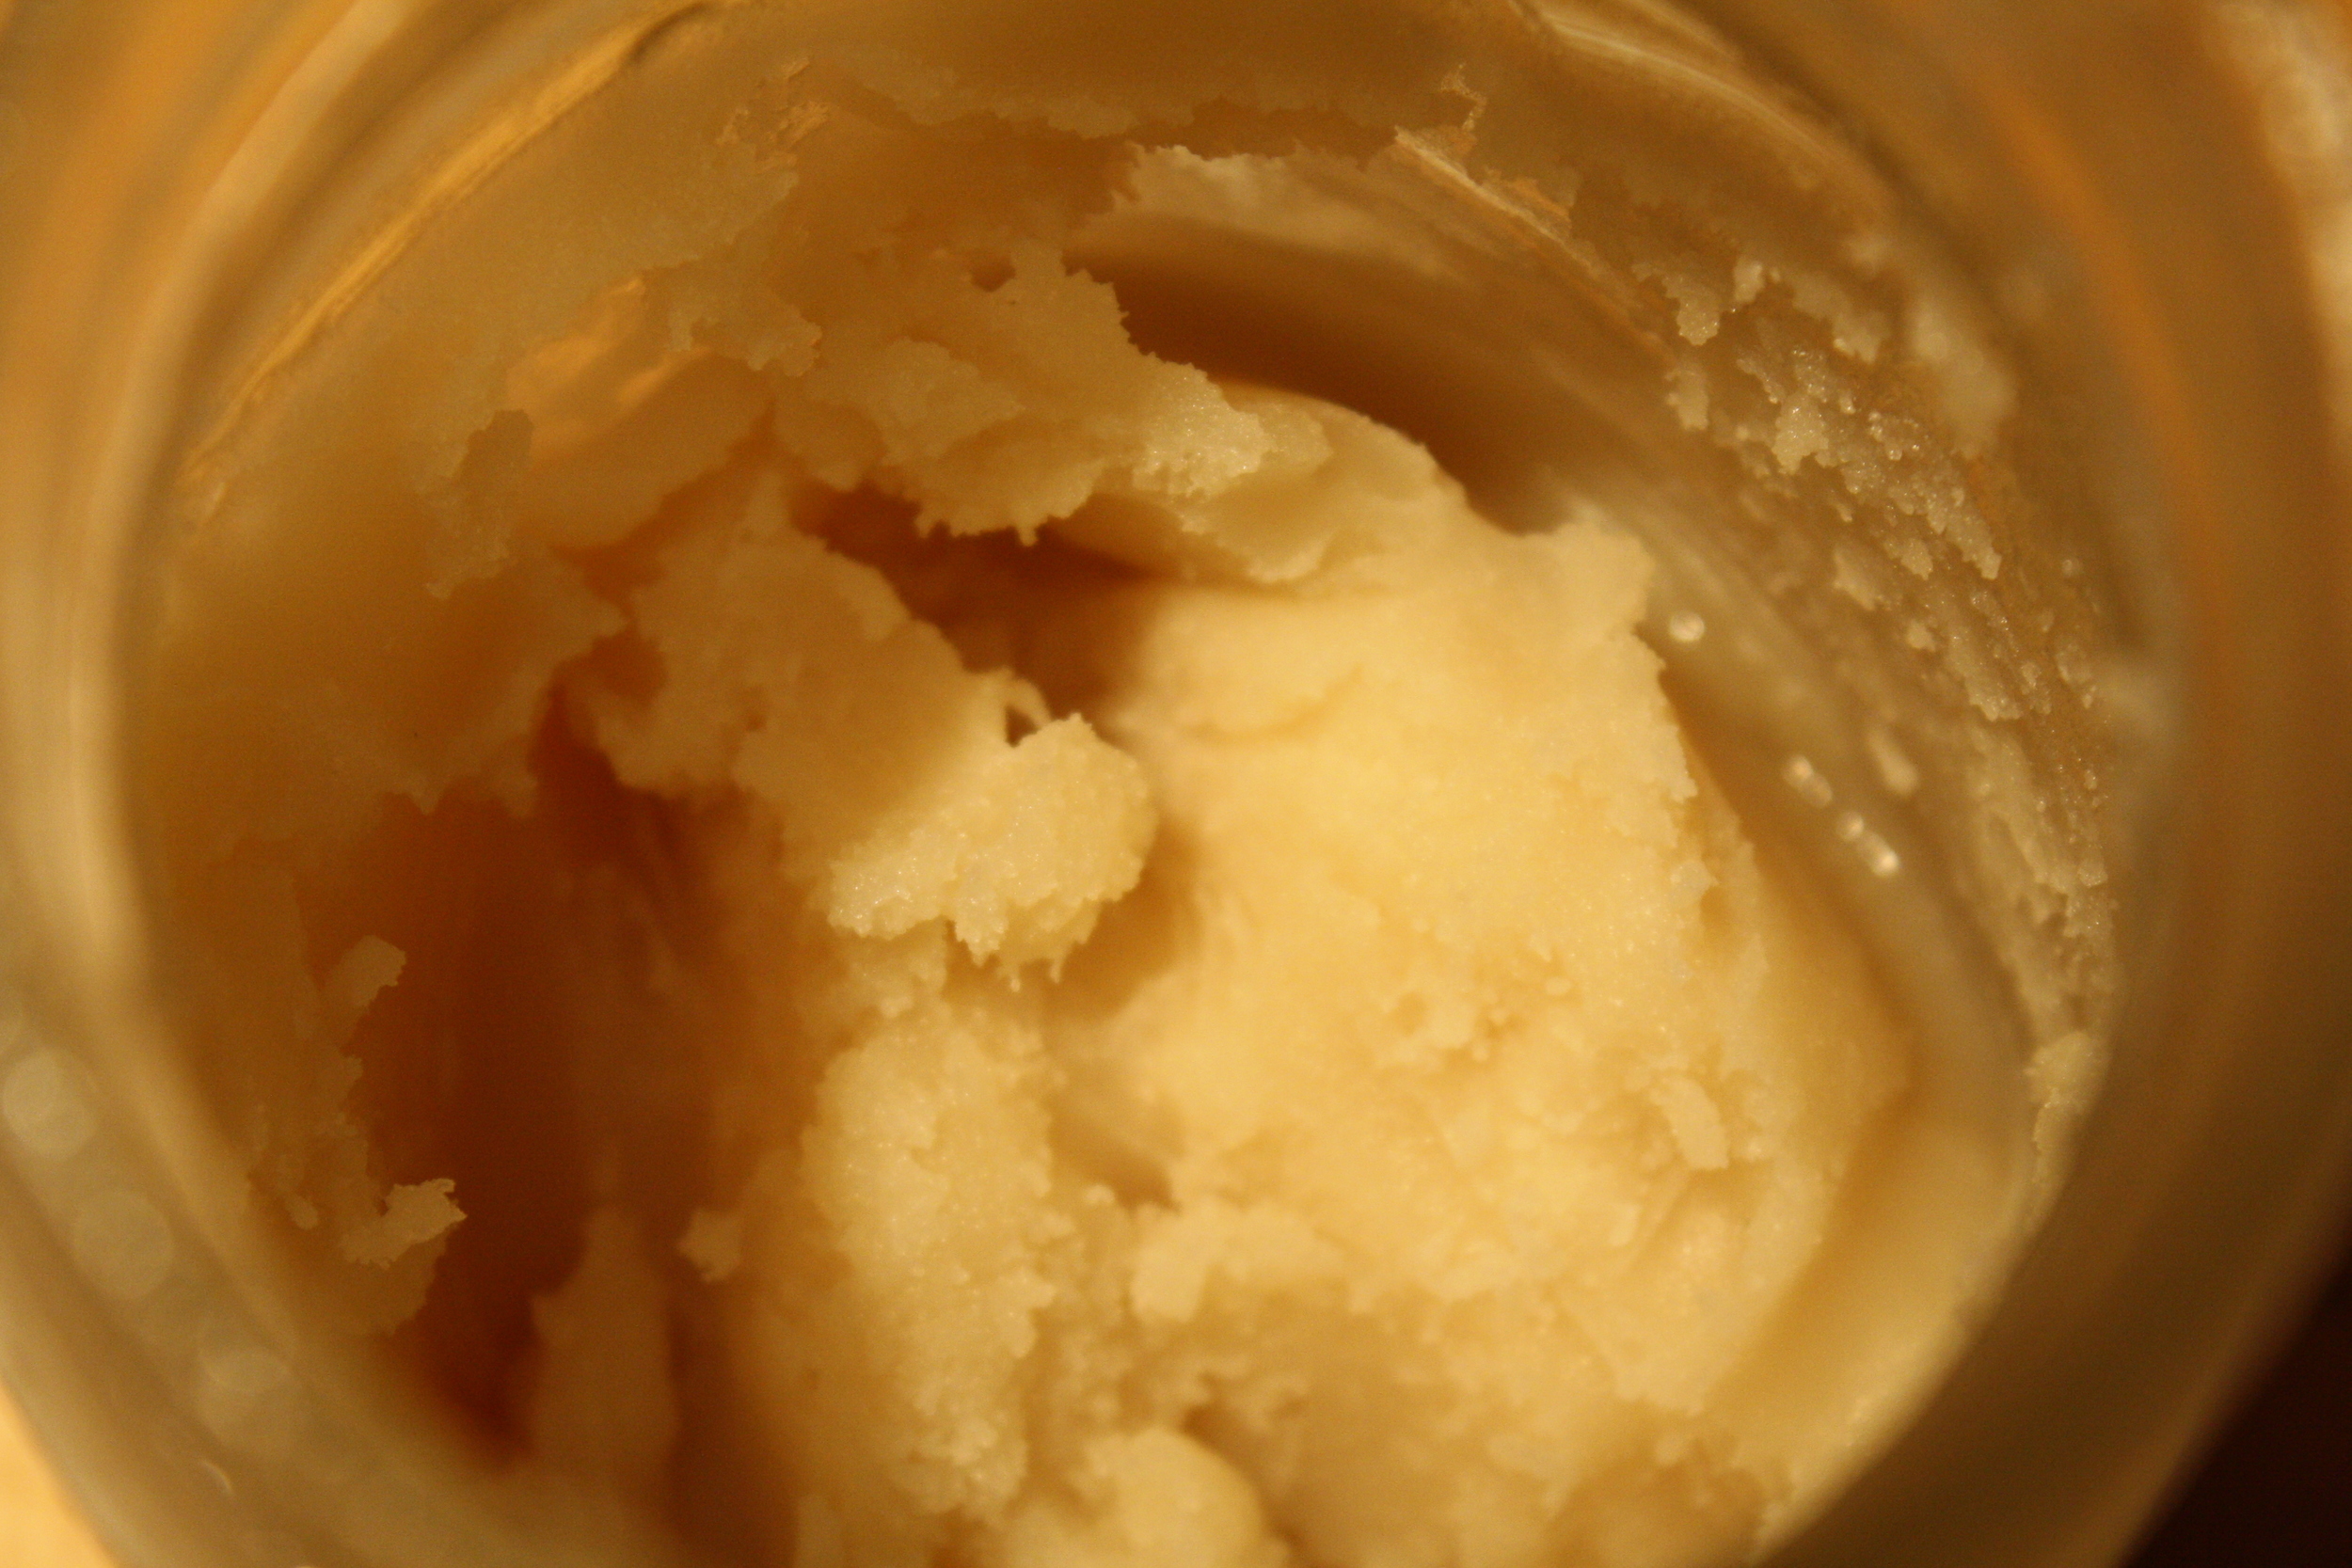 Close up view of the butter paste